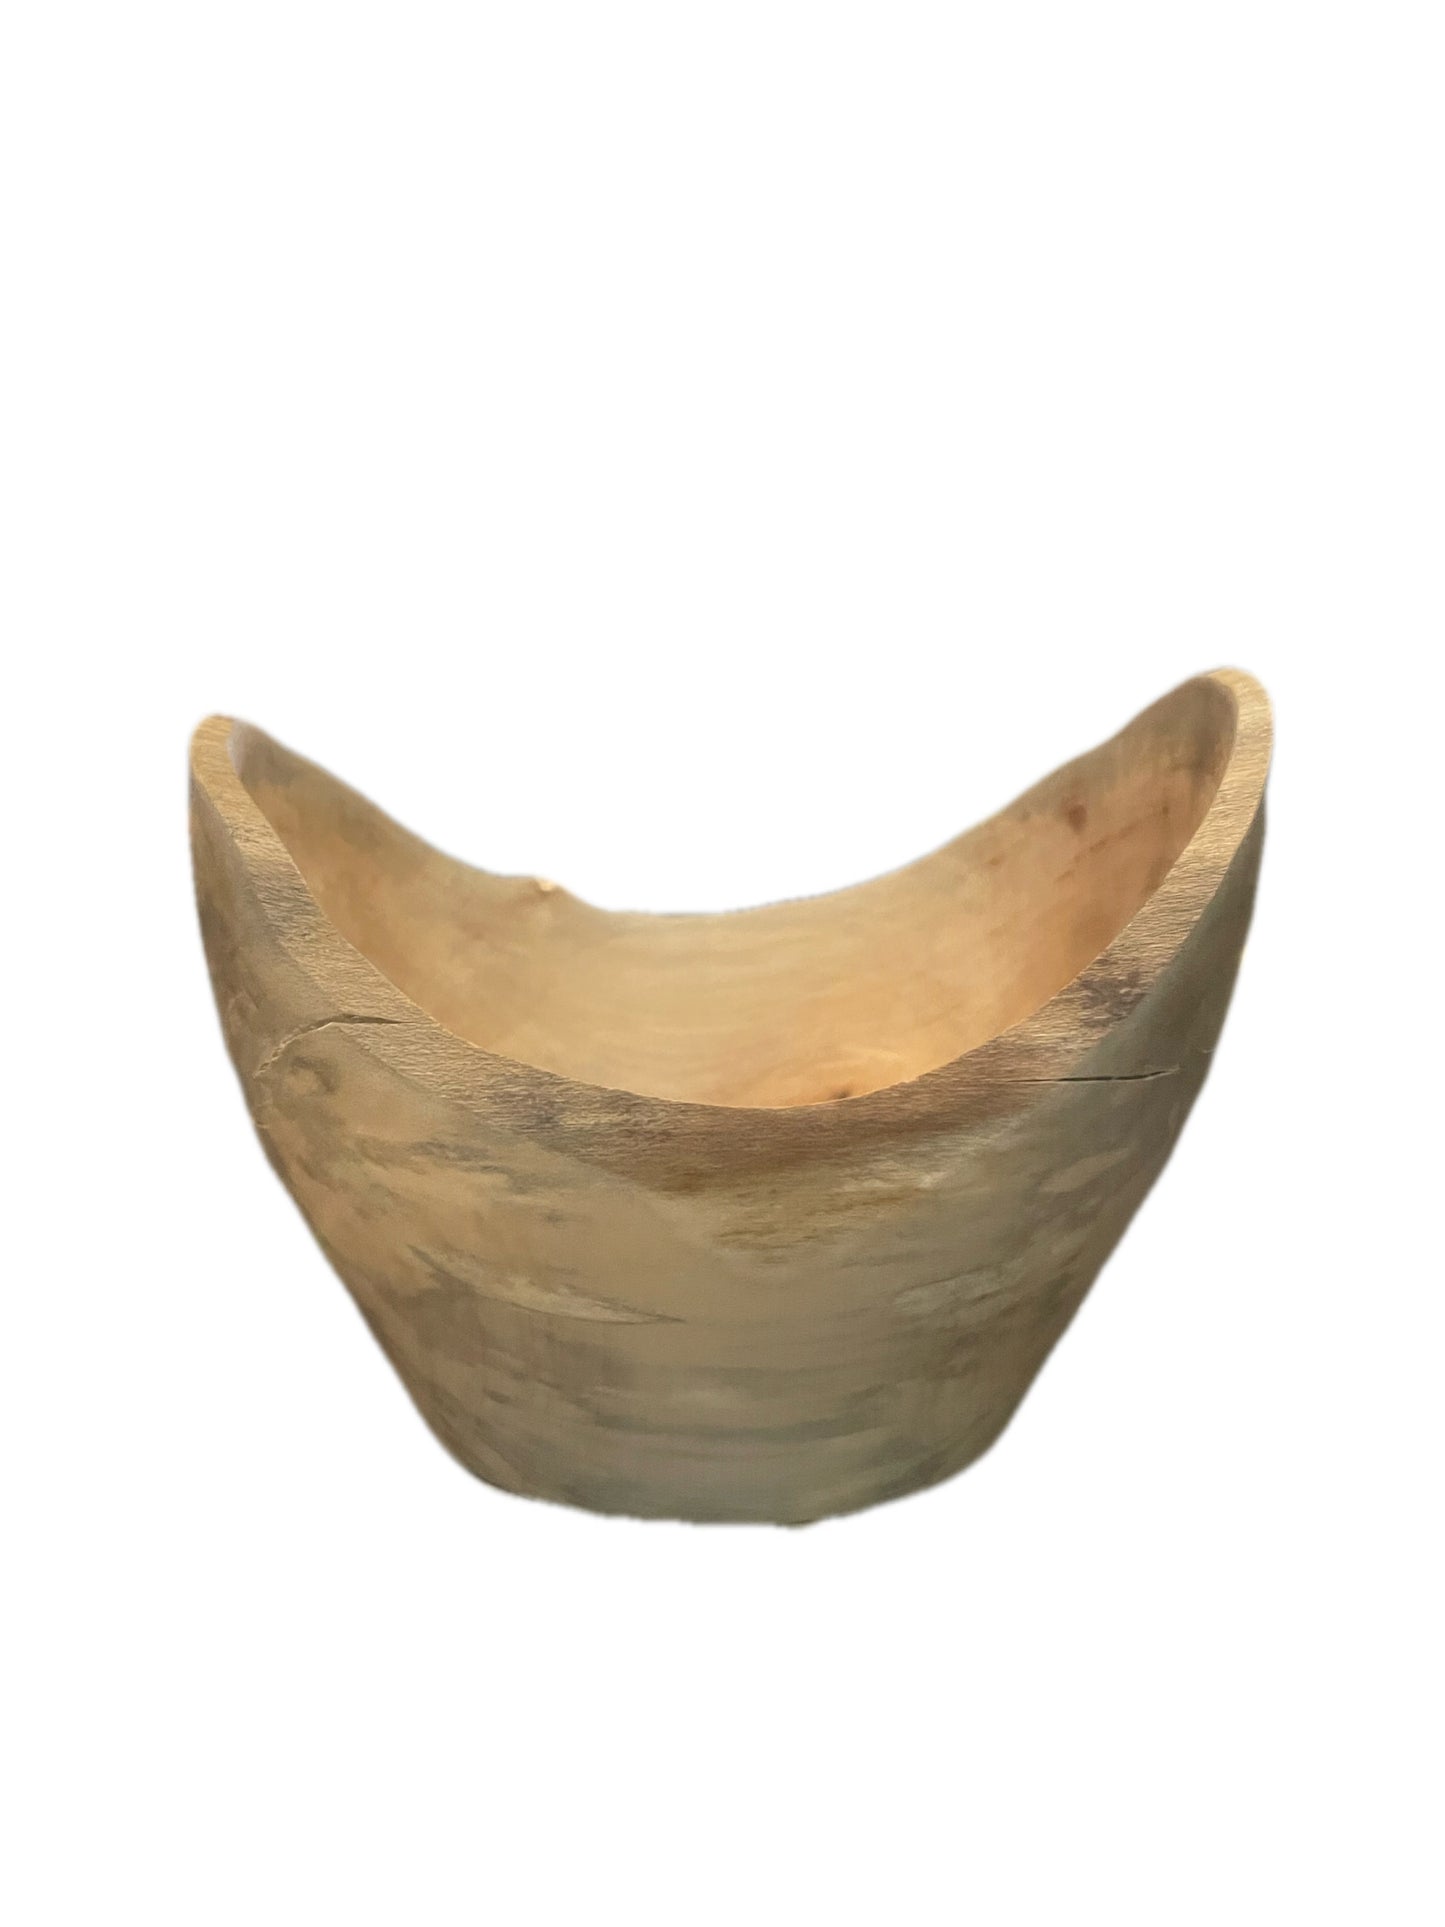 Maple Bowl (Small)